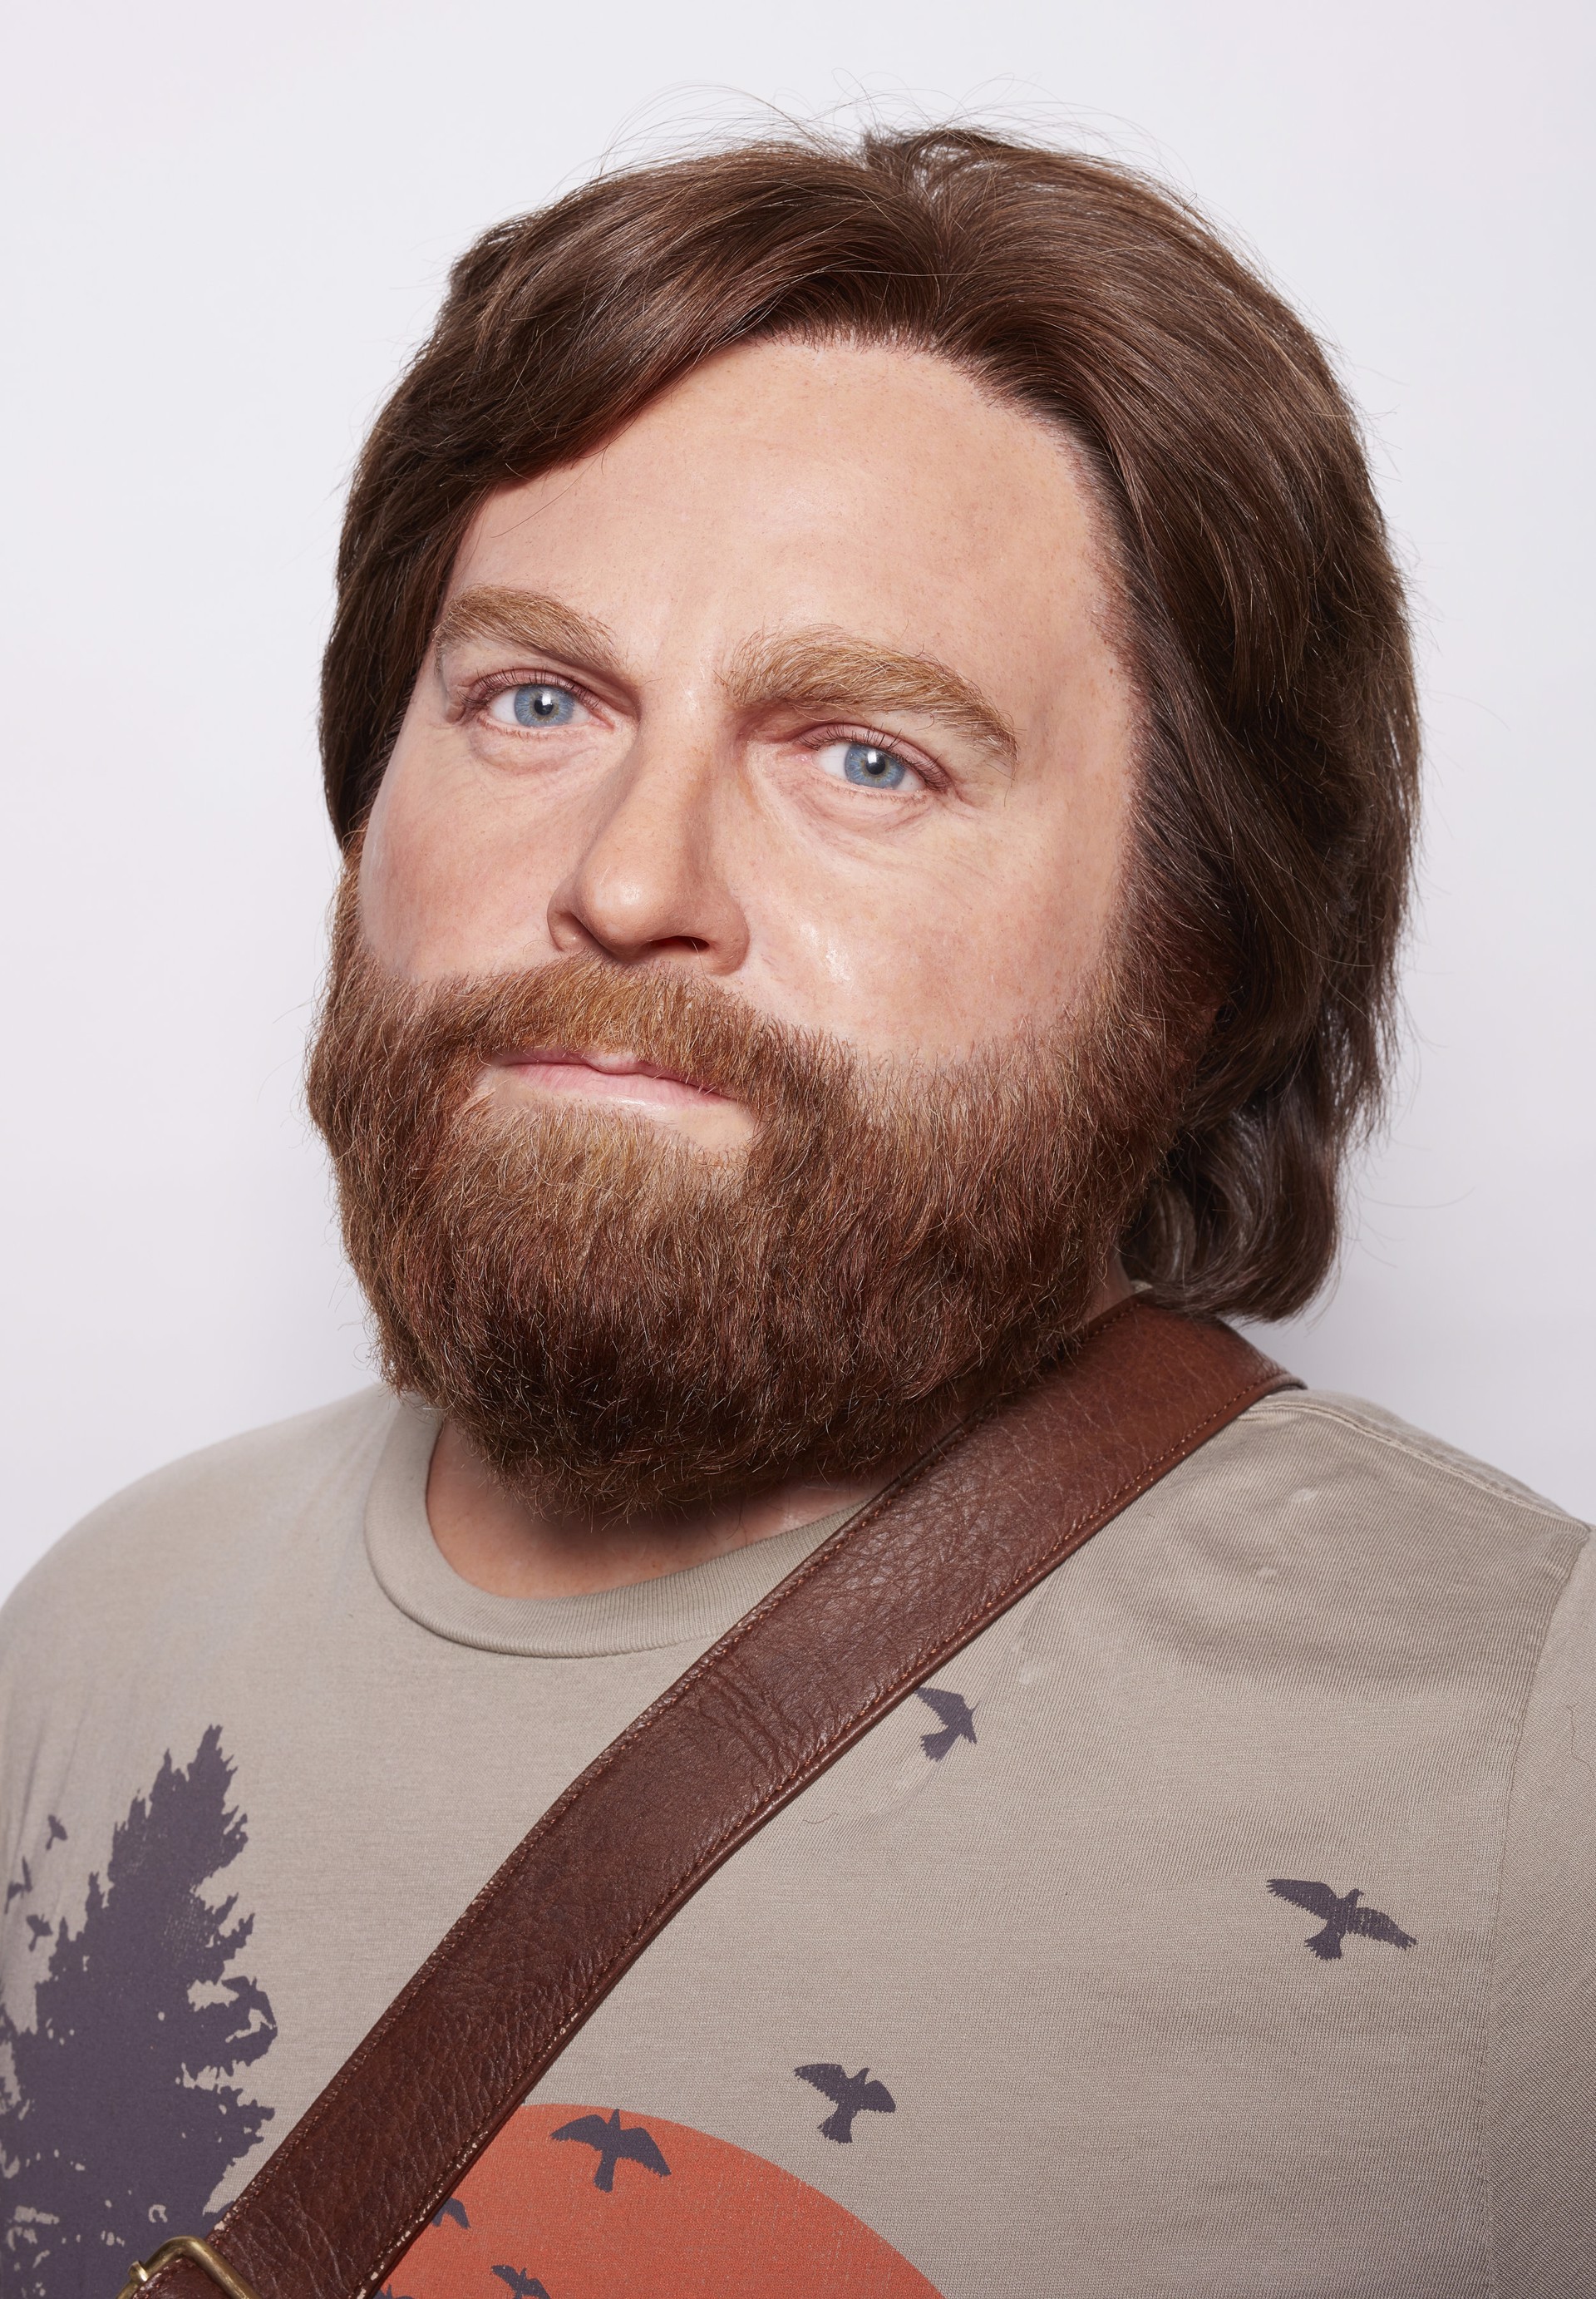 This is not Zack Galifianakis by Peter Andrew Lusztyk | Uncanny Valley